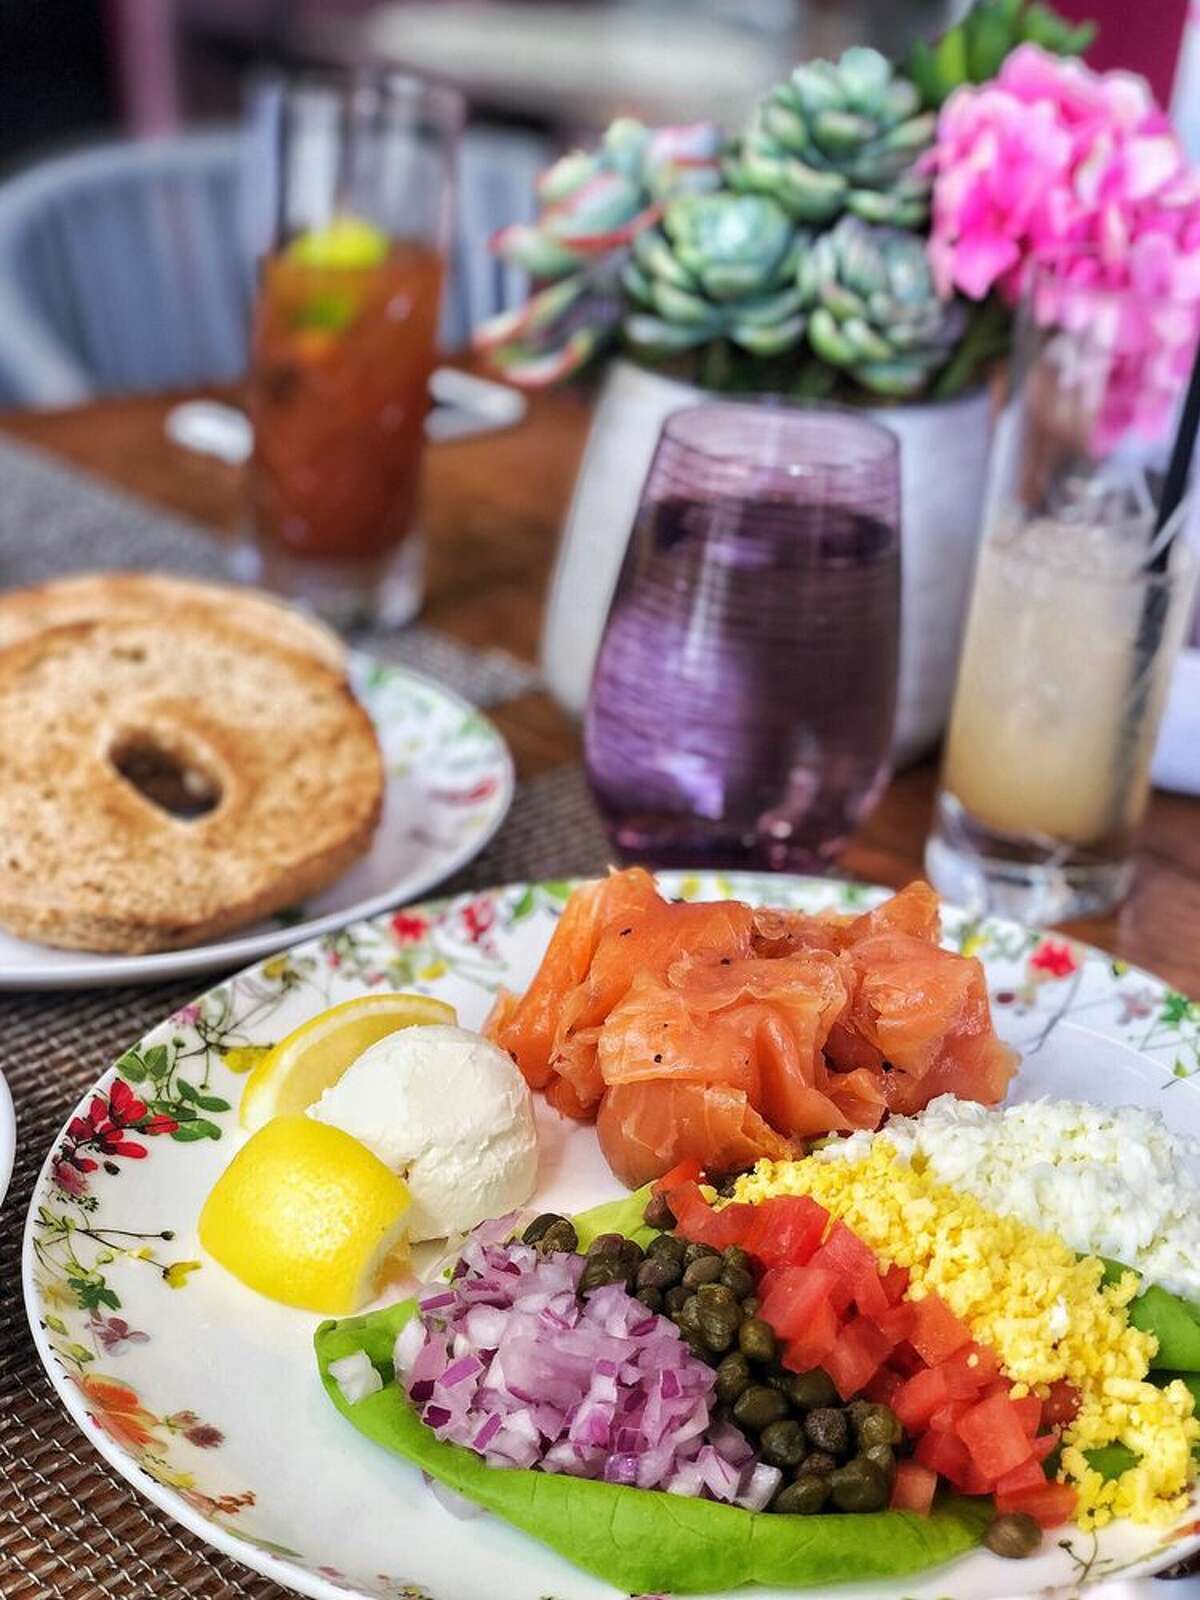 Lighter, healthier brunch fare can be found at Bloom & Bee.